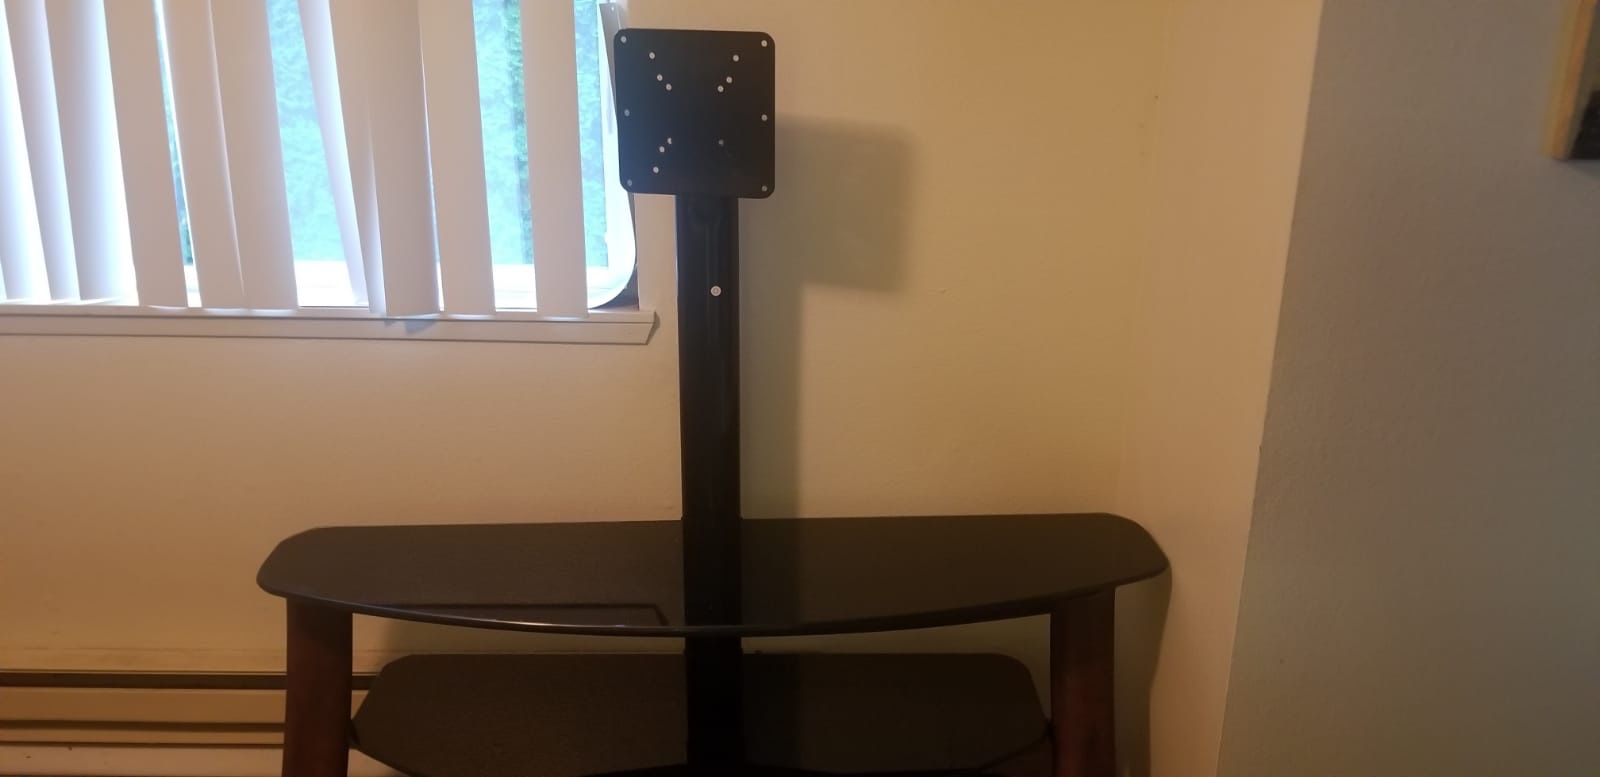 Entertainment Center Stand Holds Flat Screen TV